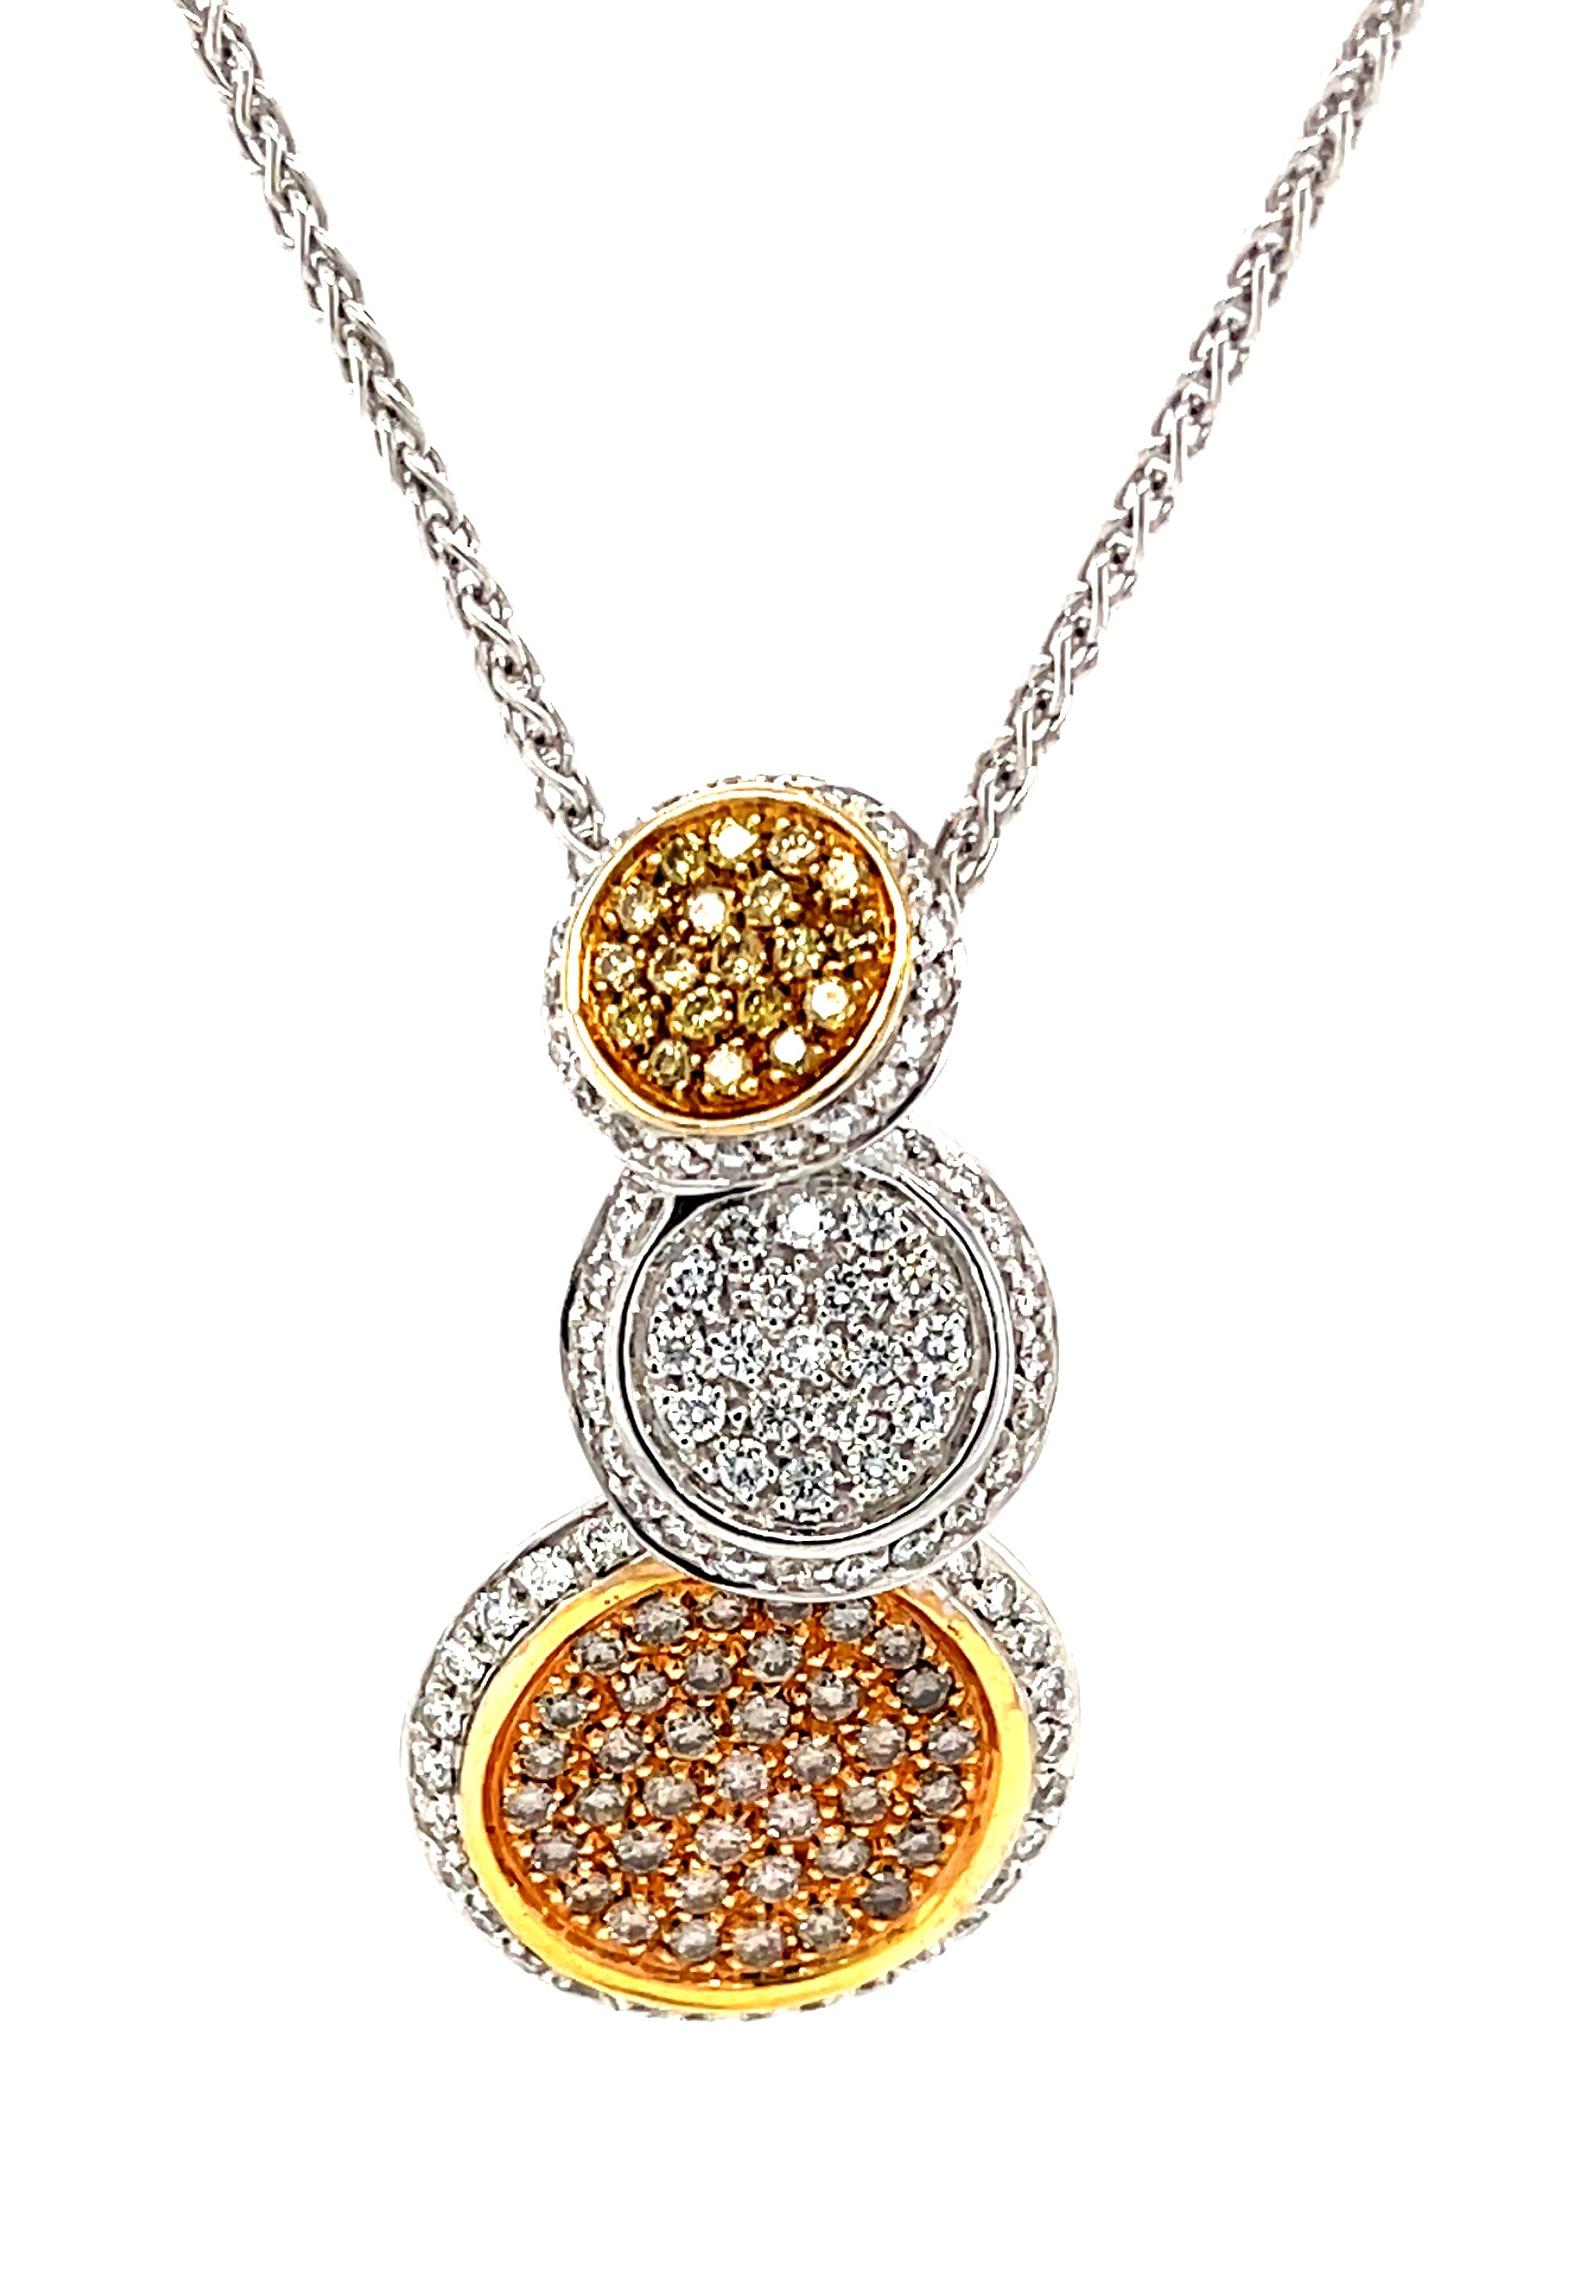 This stylish necklace features yellow, white and natural coffee brown diamonds pave set in 18k yellow, white and rose gold! Each of the three discs making up this contemporary design is a different size, set with one of the three colors of brilliant